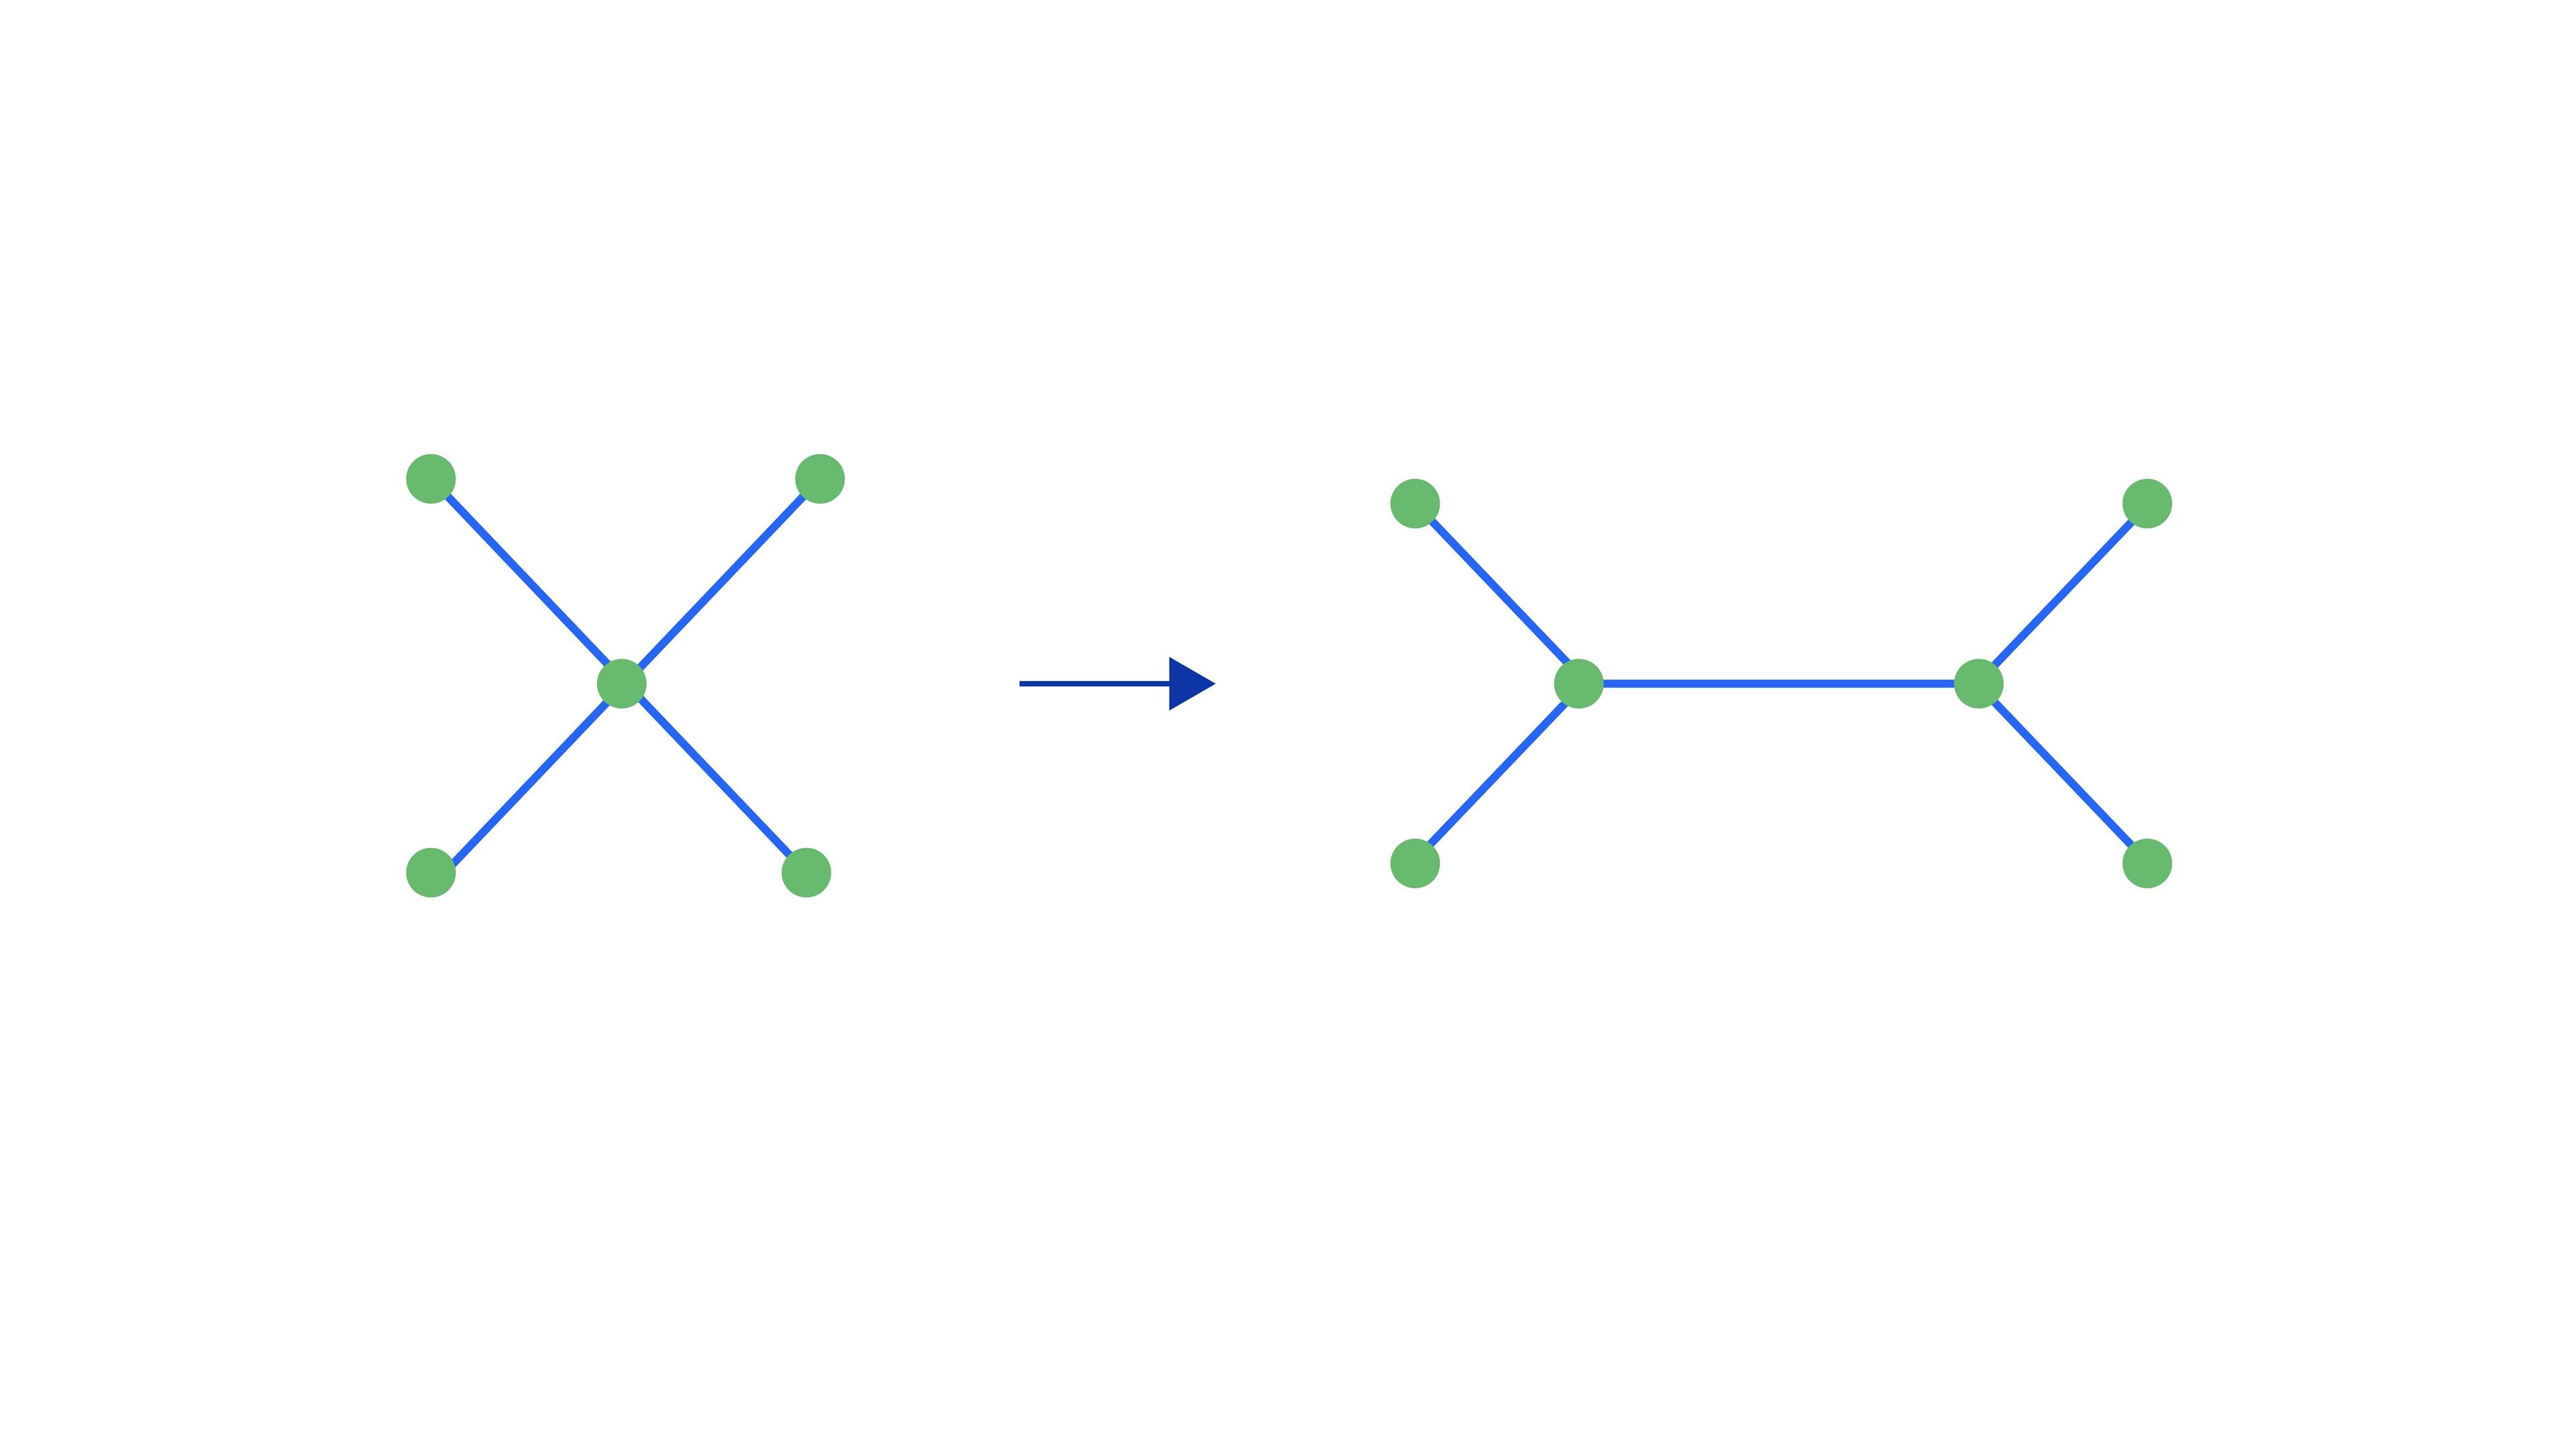 Reduction of a degree four node into two degree three nodes compatible with the heavy-hex lattice.